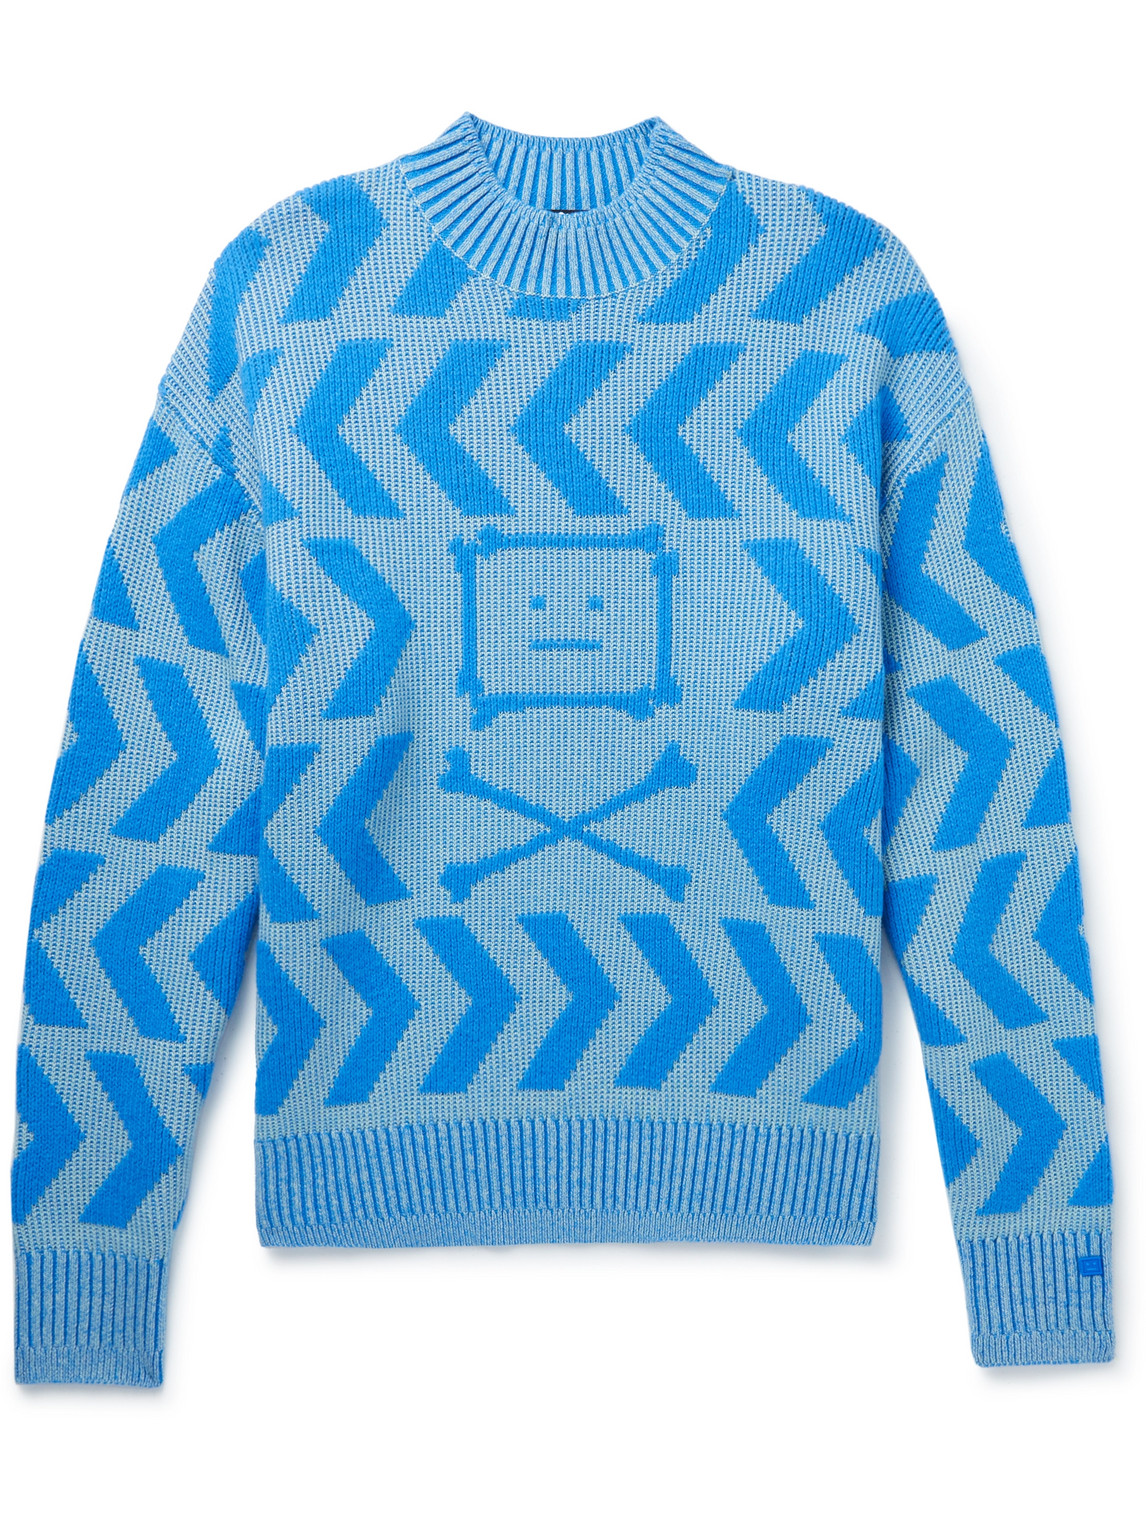 ACNE STUDIOS INTARSIA WOOL AND COTTON-BLEND SWEATER